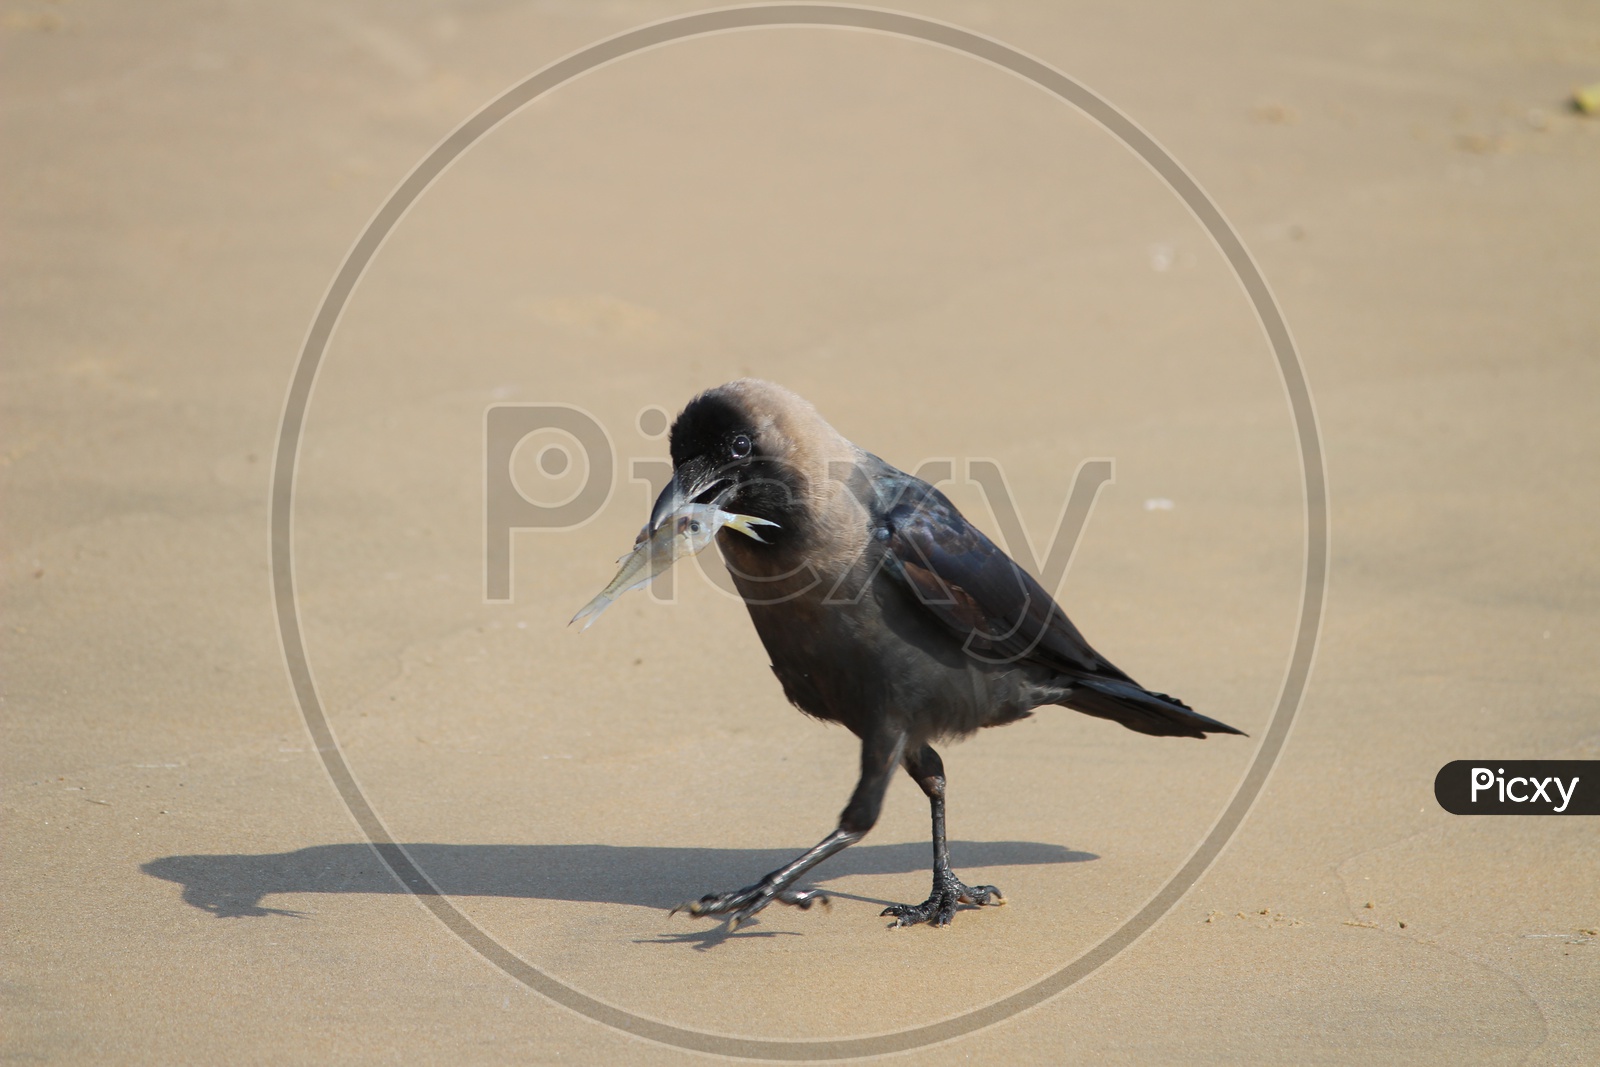 Crow With a Fish To His Beak In a Beach